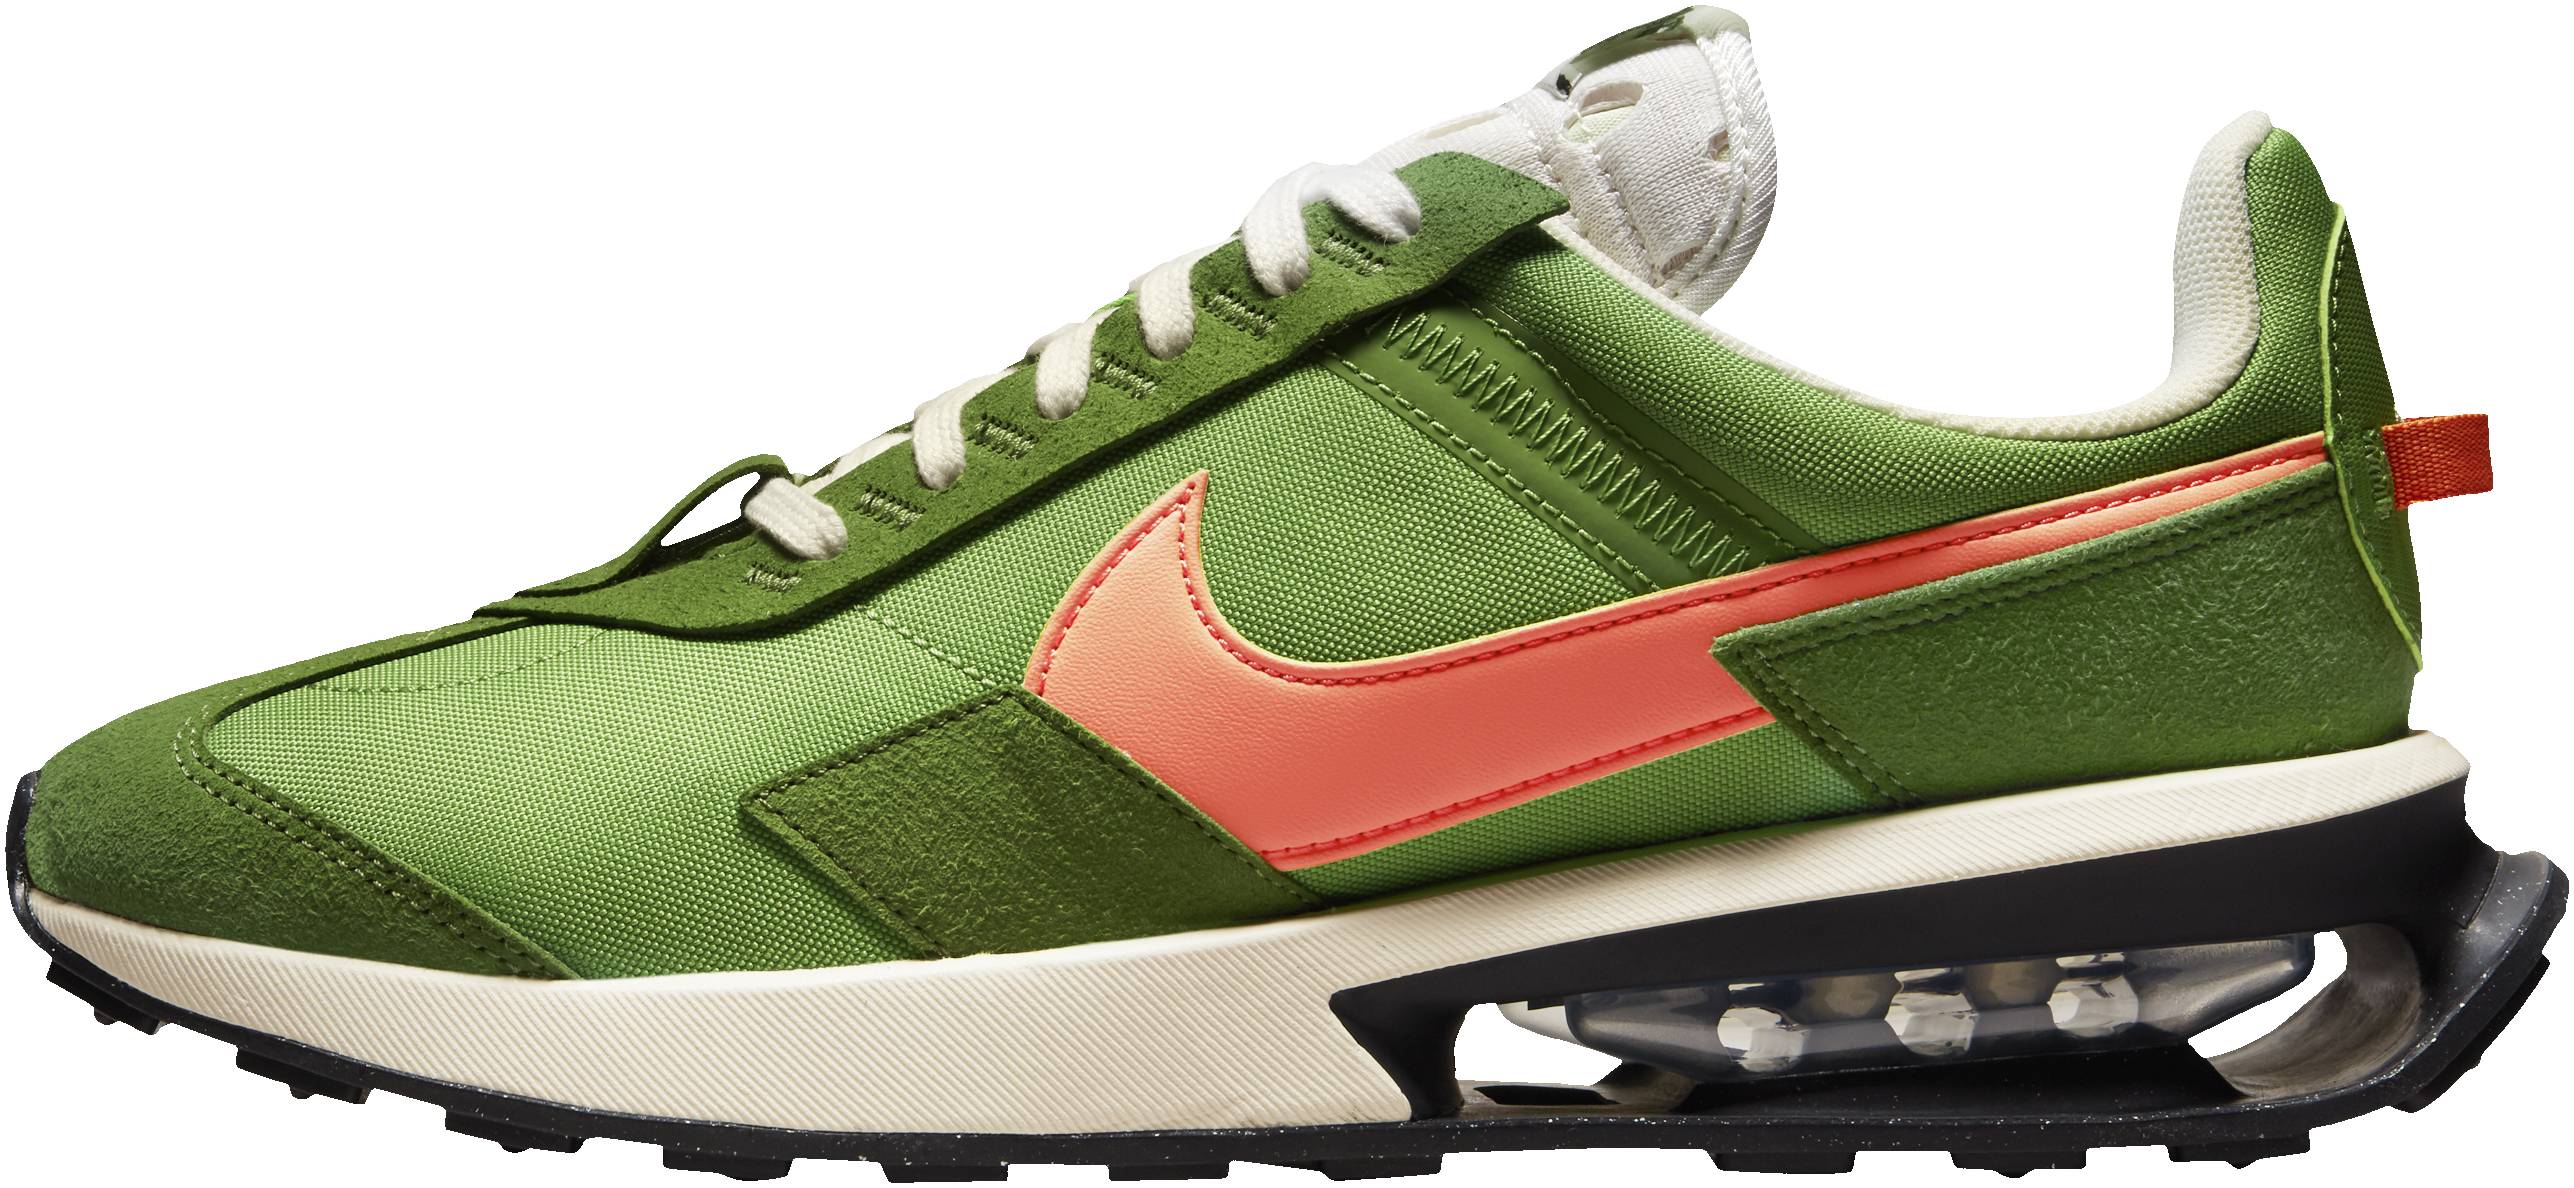 Soap eternal Bet Nike Air Max Pre-Day LX sneakers in 4 colors (only $100) | RunRepeat